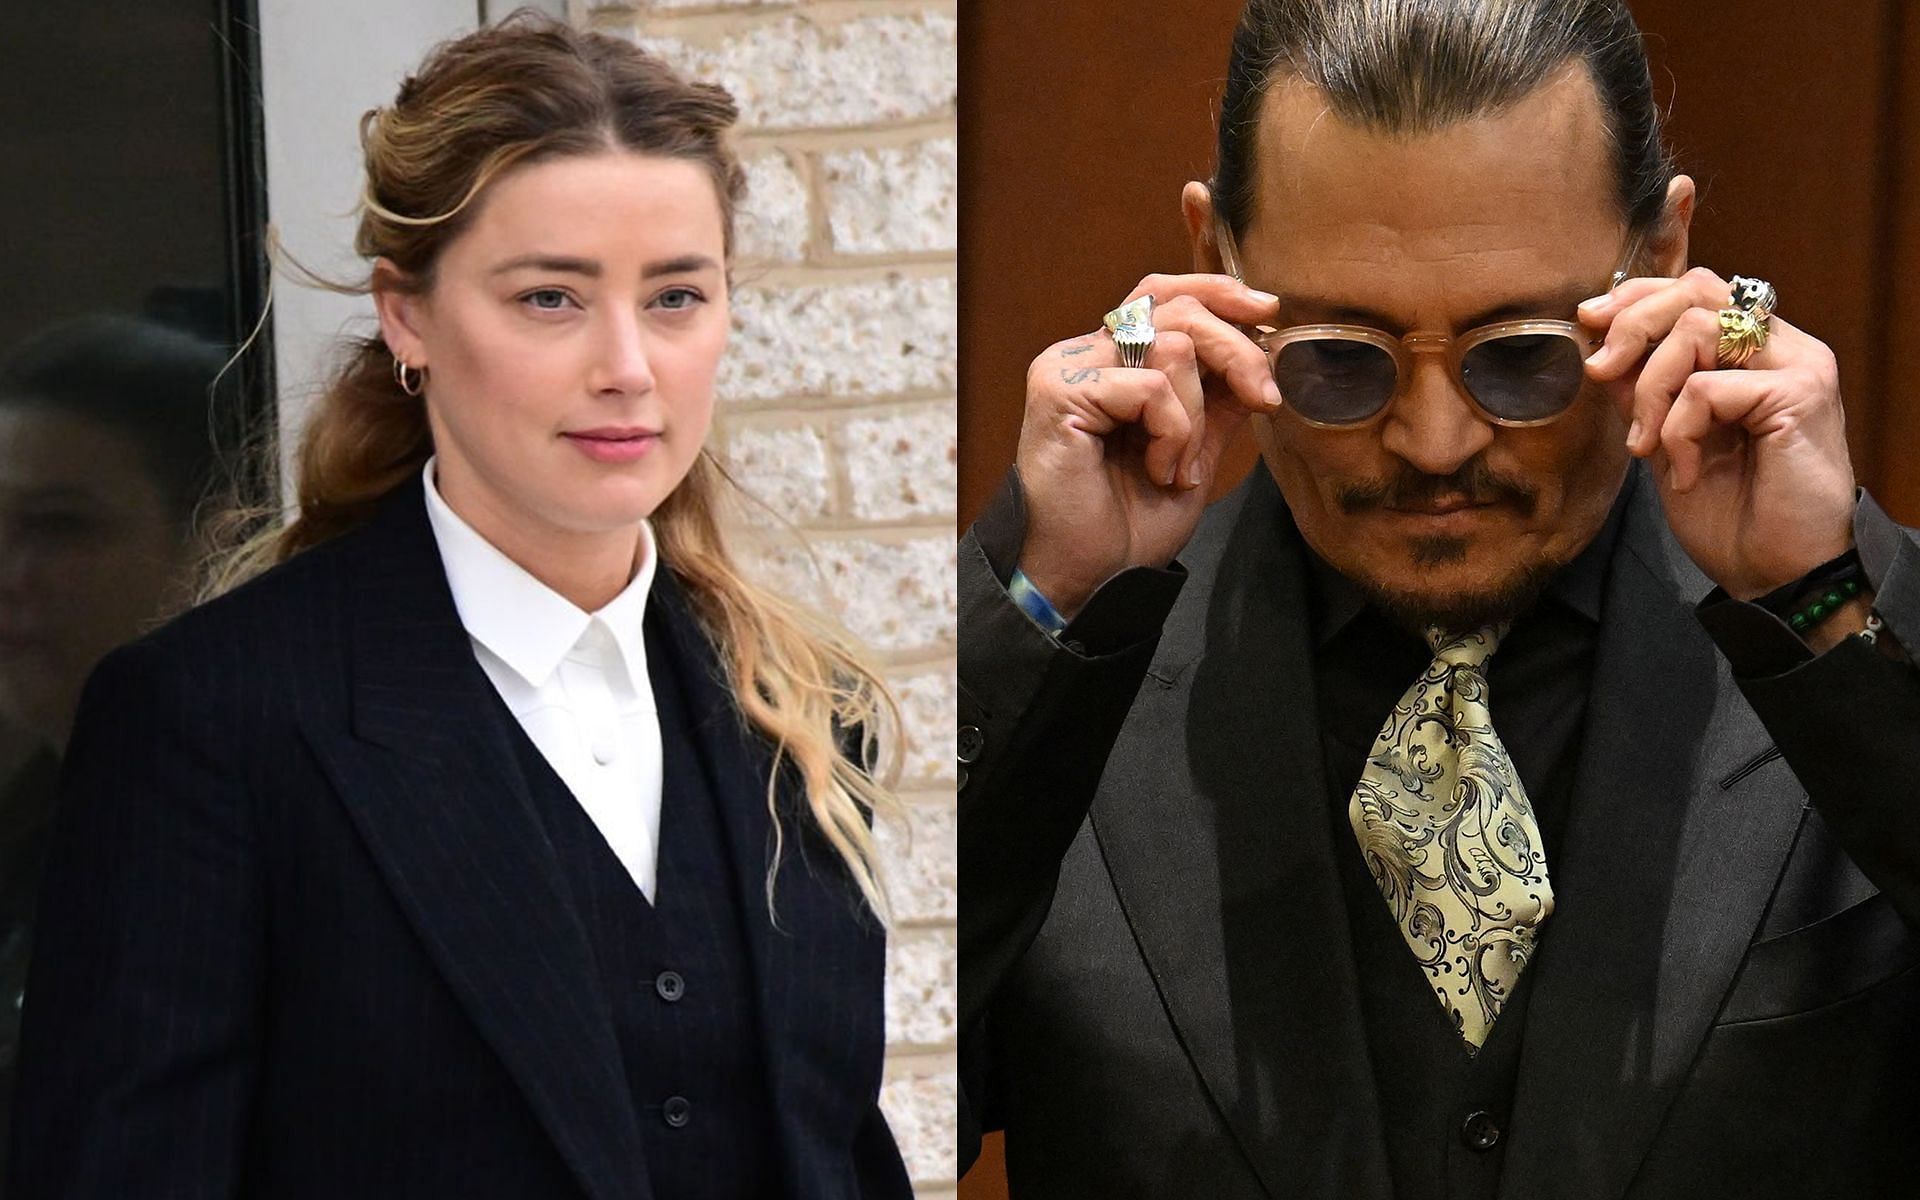 Amber Heard and Johnny Depp (Images via Getty Images)